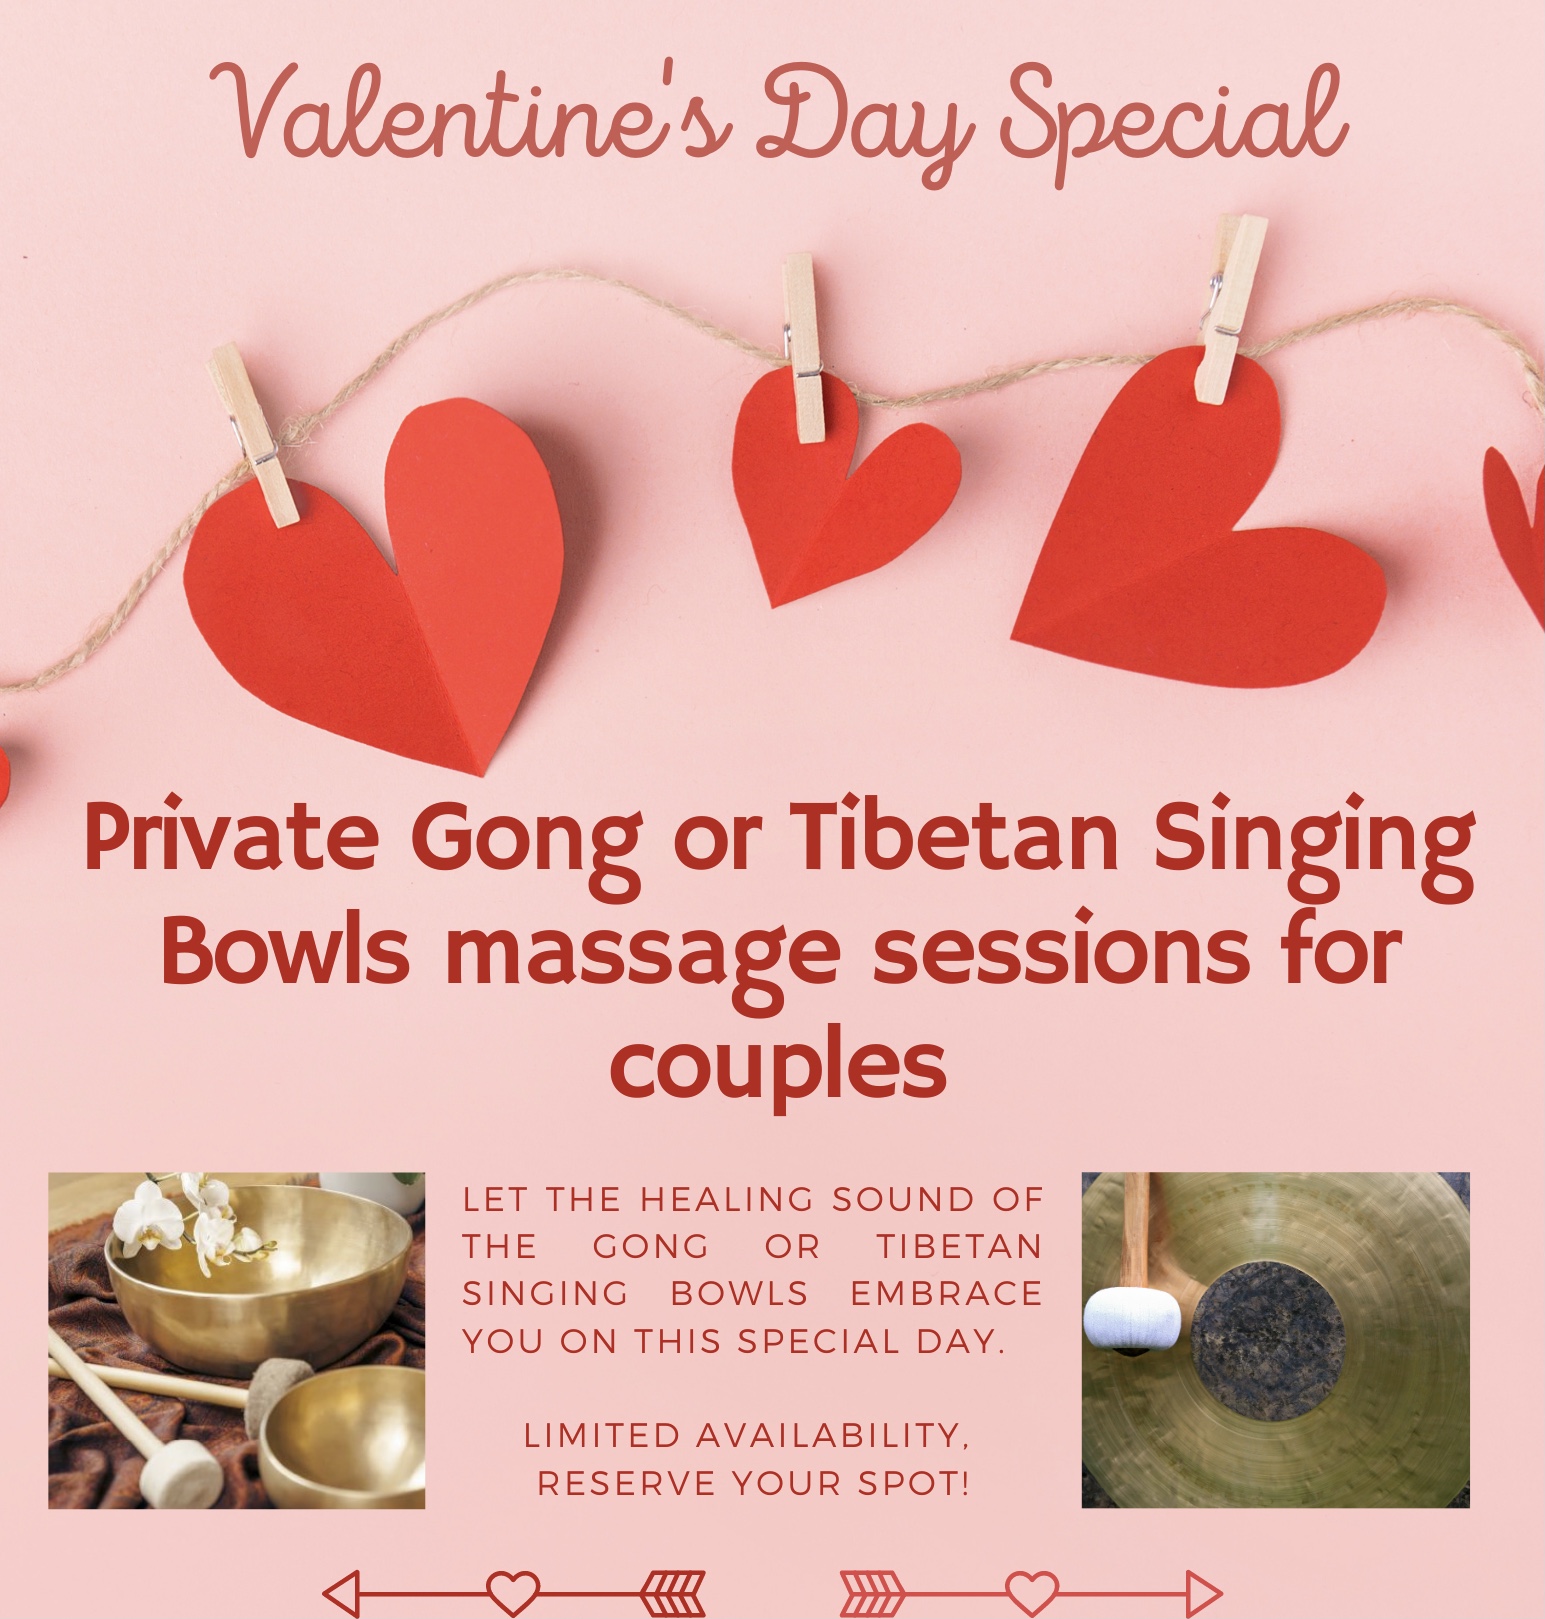 Private Gong or Tibetan Singing Bowls massage sessions for couples Let the Healing Sound of the Gong or Tibetan Singing Bowls embrace you on this special day. Limited availability, reserve your spot! - 1